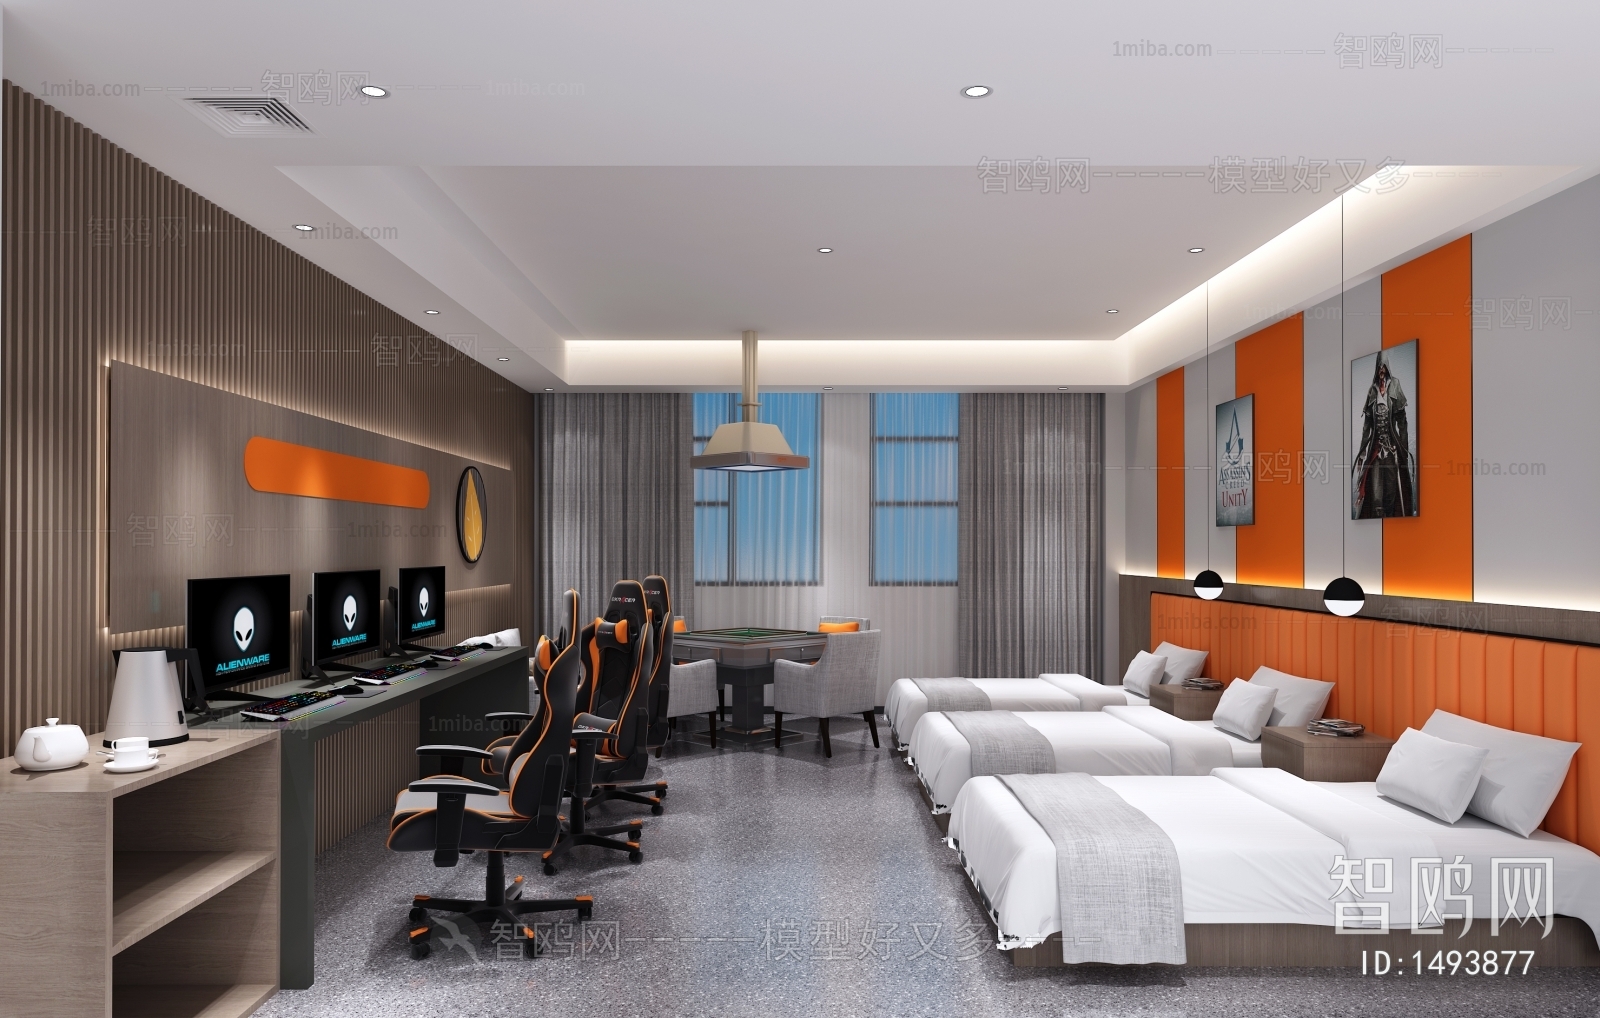 Modern Space For Entertainment